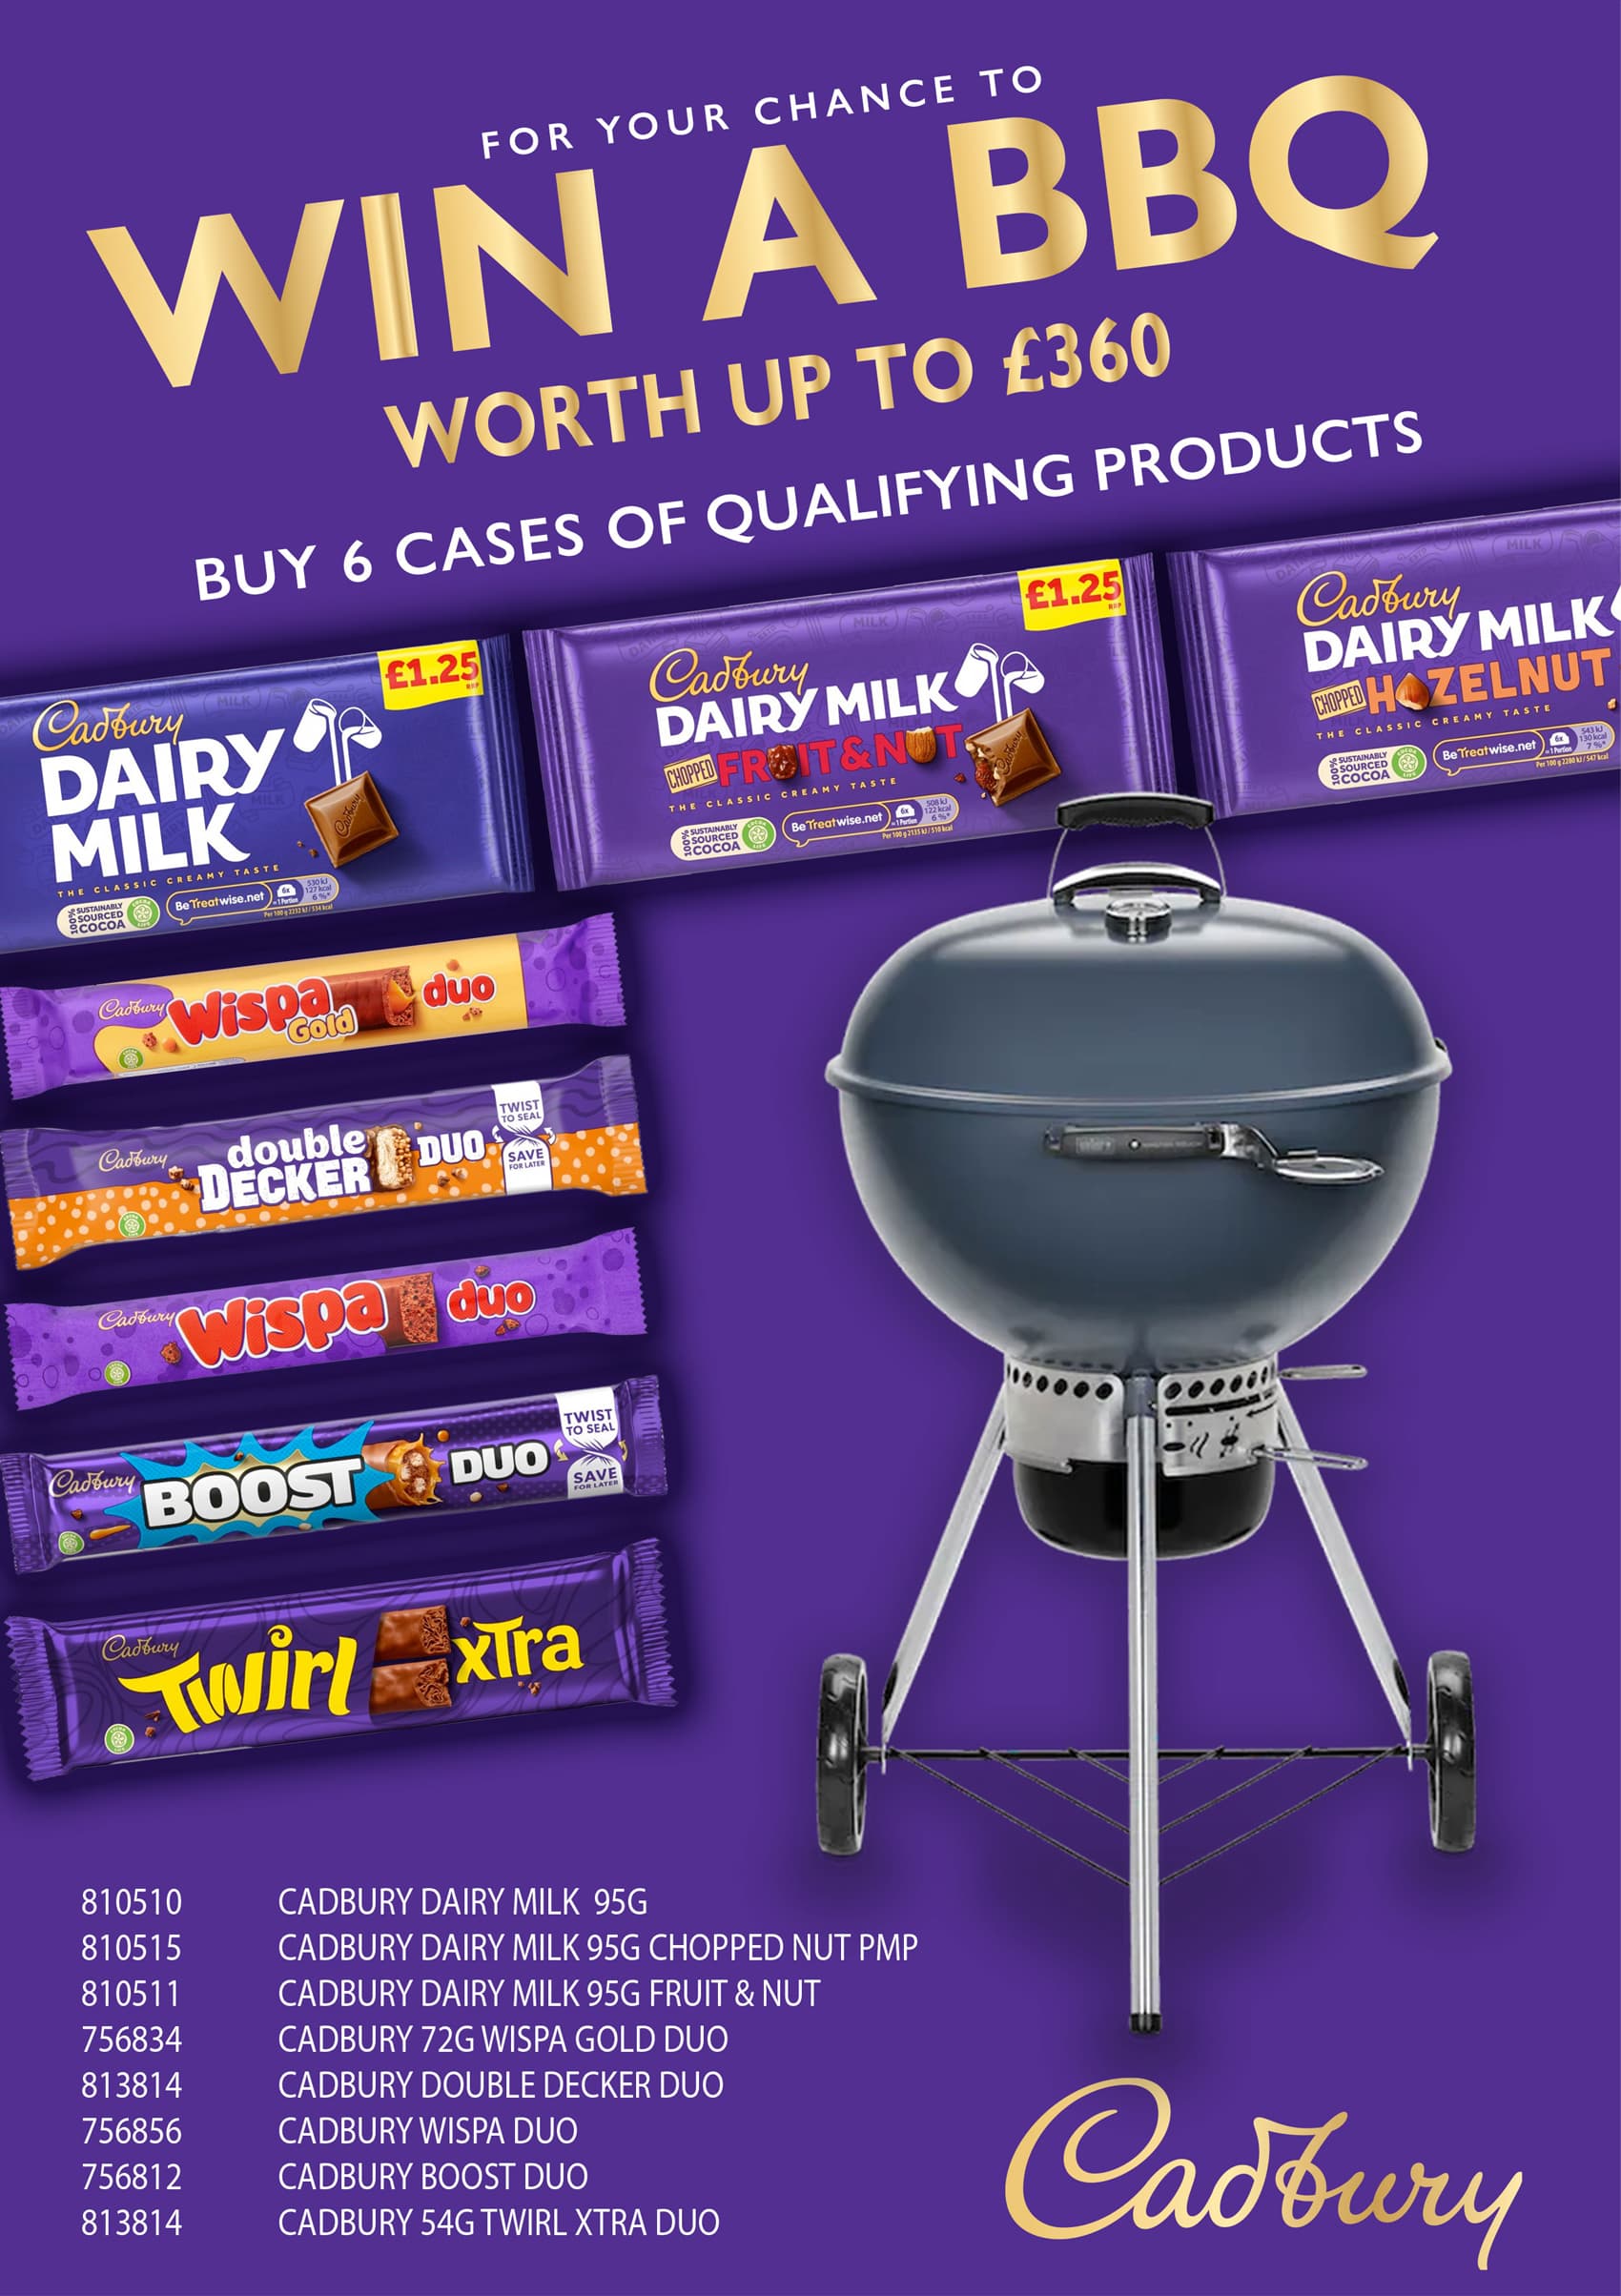 Cadbury competition - win a BBQ